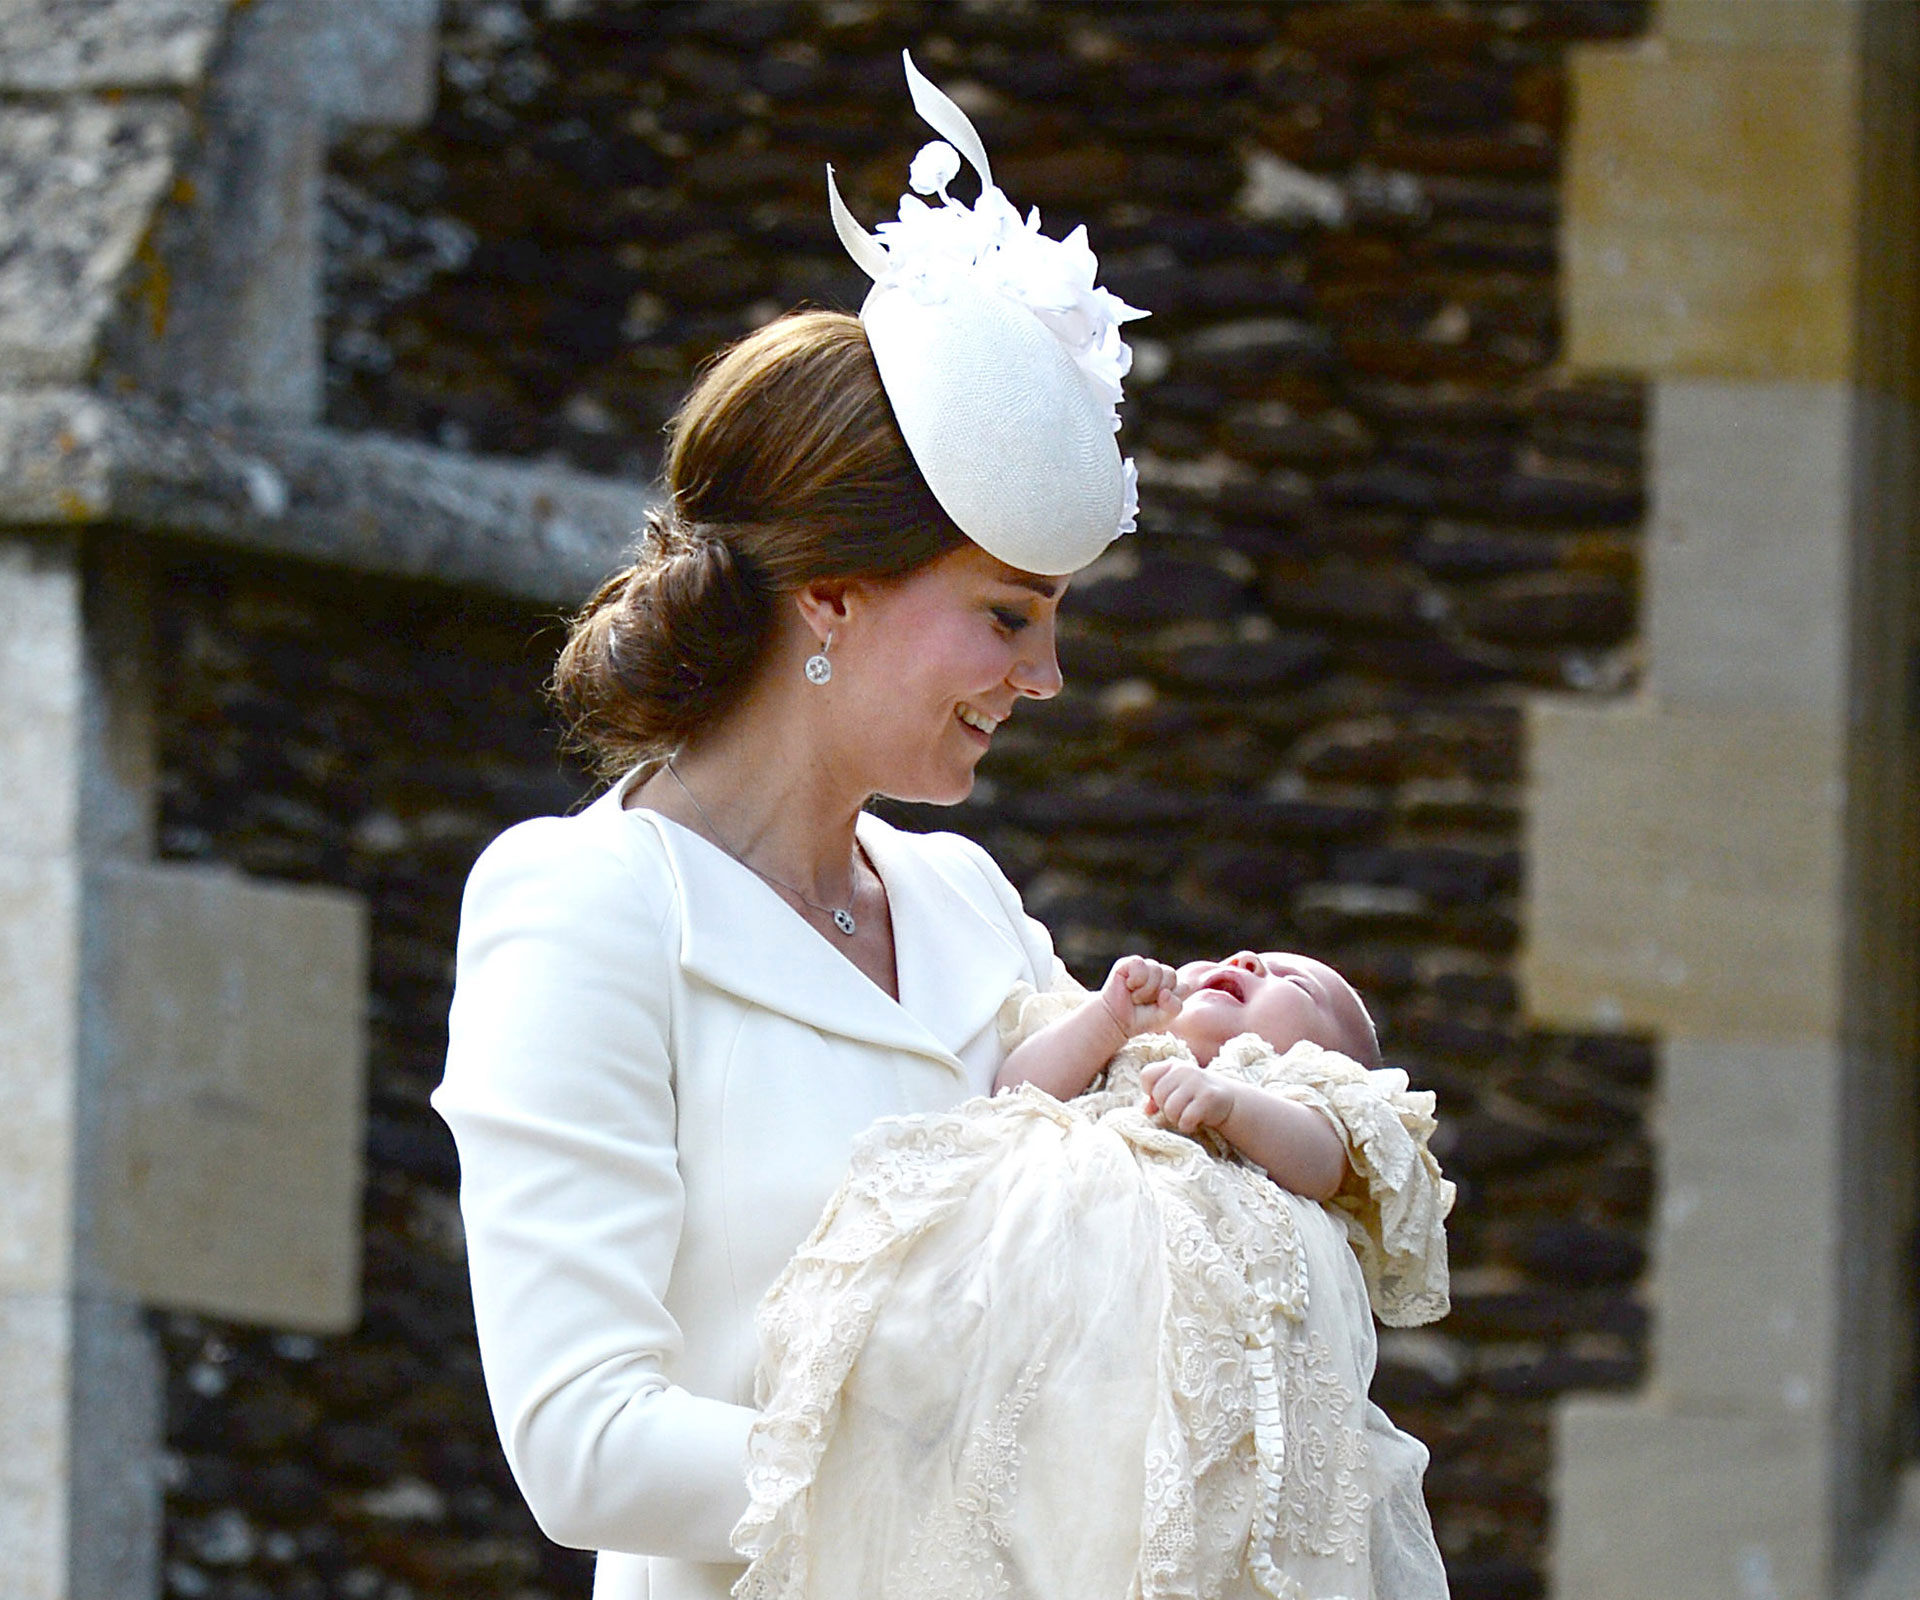 Catherine Duchess of Cambridge holding daughter Princess Charlotte on her christening day